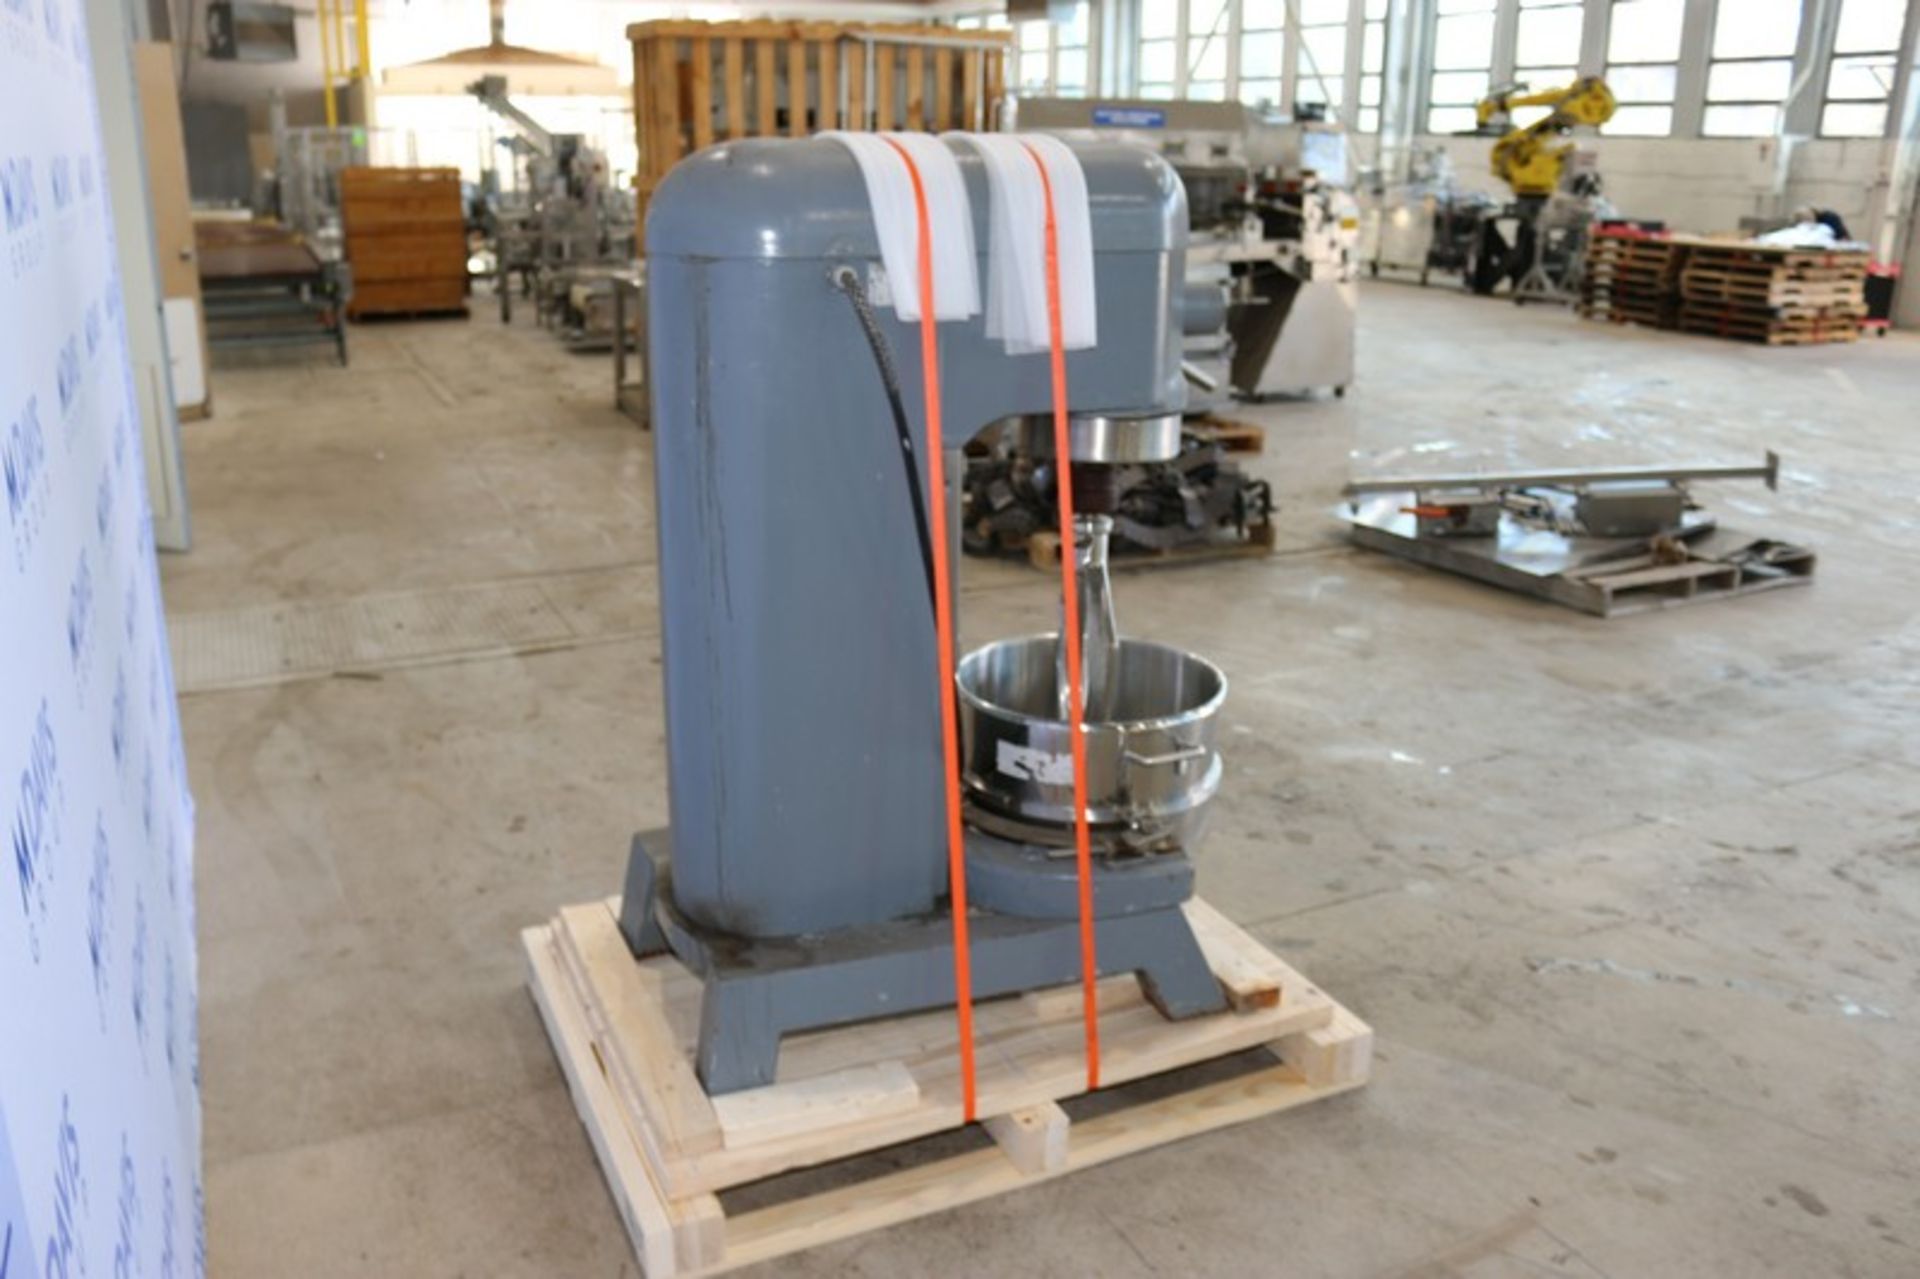 Hobart Mixer,-M/N L-800, S/N 11-213-617, 200 Volts, 1725 RPM Motor, with 1-1/2 hp Motor, with S/S - Bild 4 aus 6